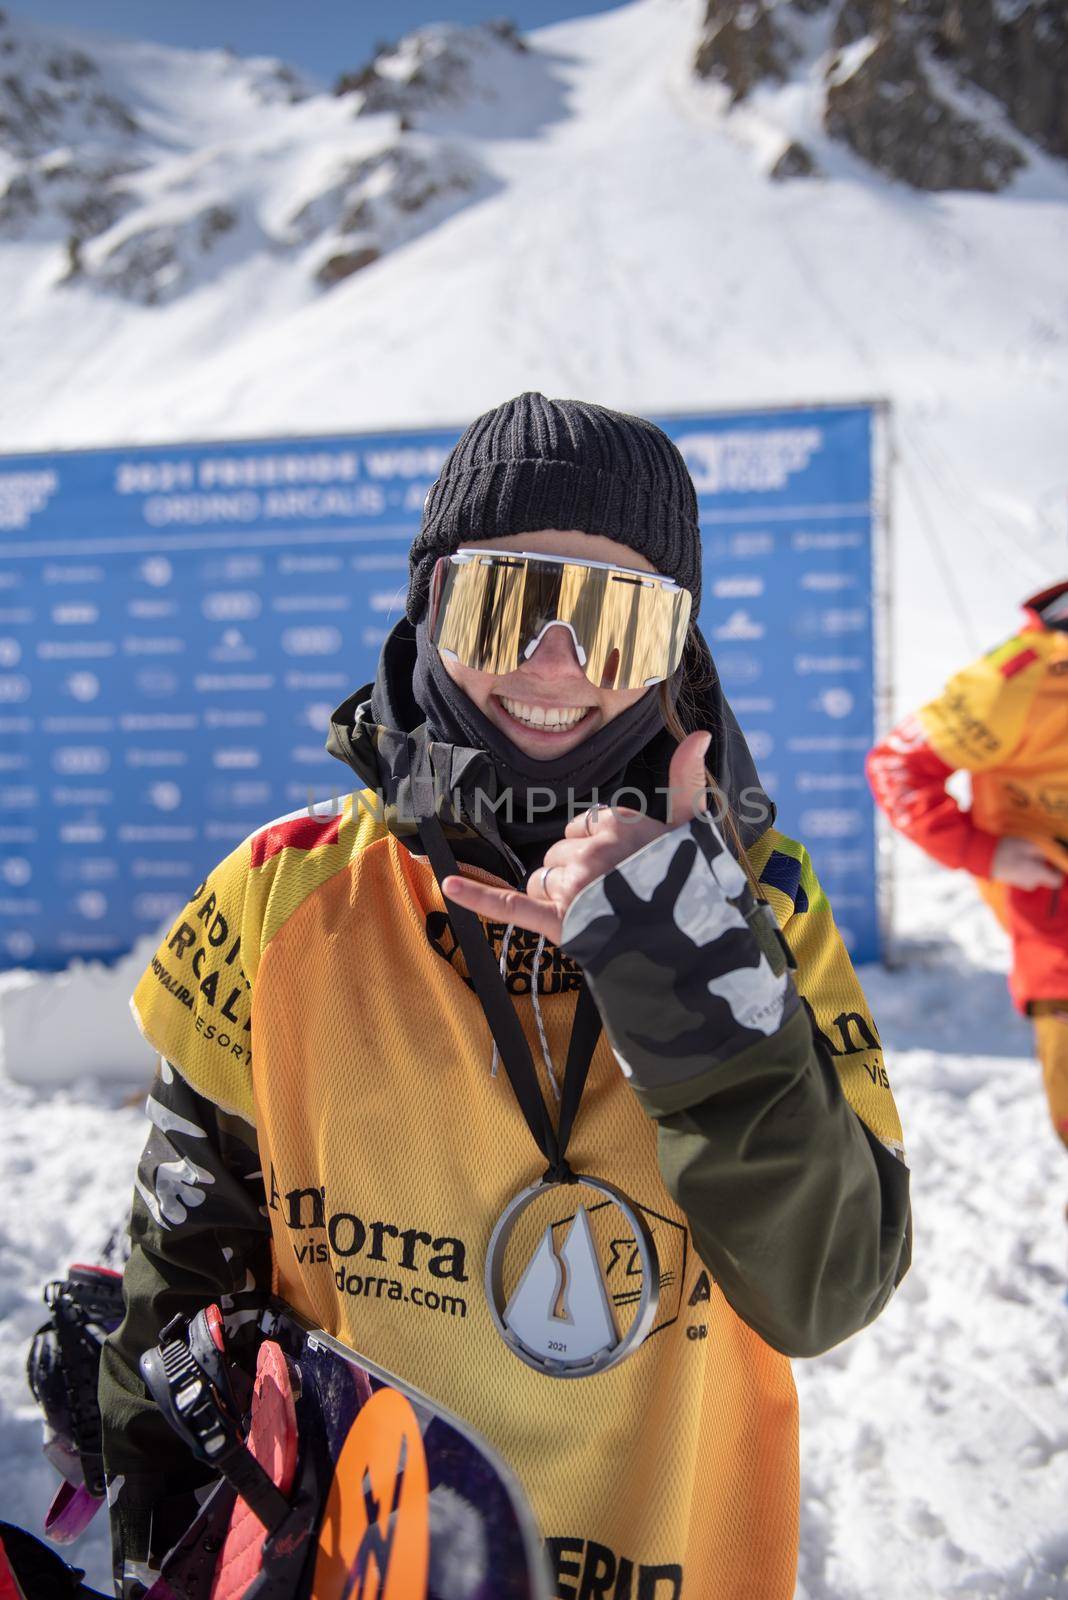 Ordino Arcalis, Andorra: 2021 February 24: Marion Haerty in action at the Freeride World Tour 2021 Step 2 at Ordino Alcalis in Andorra in the winter of 2021.